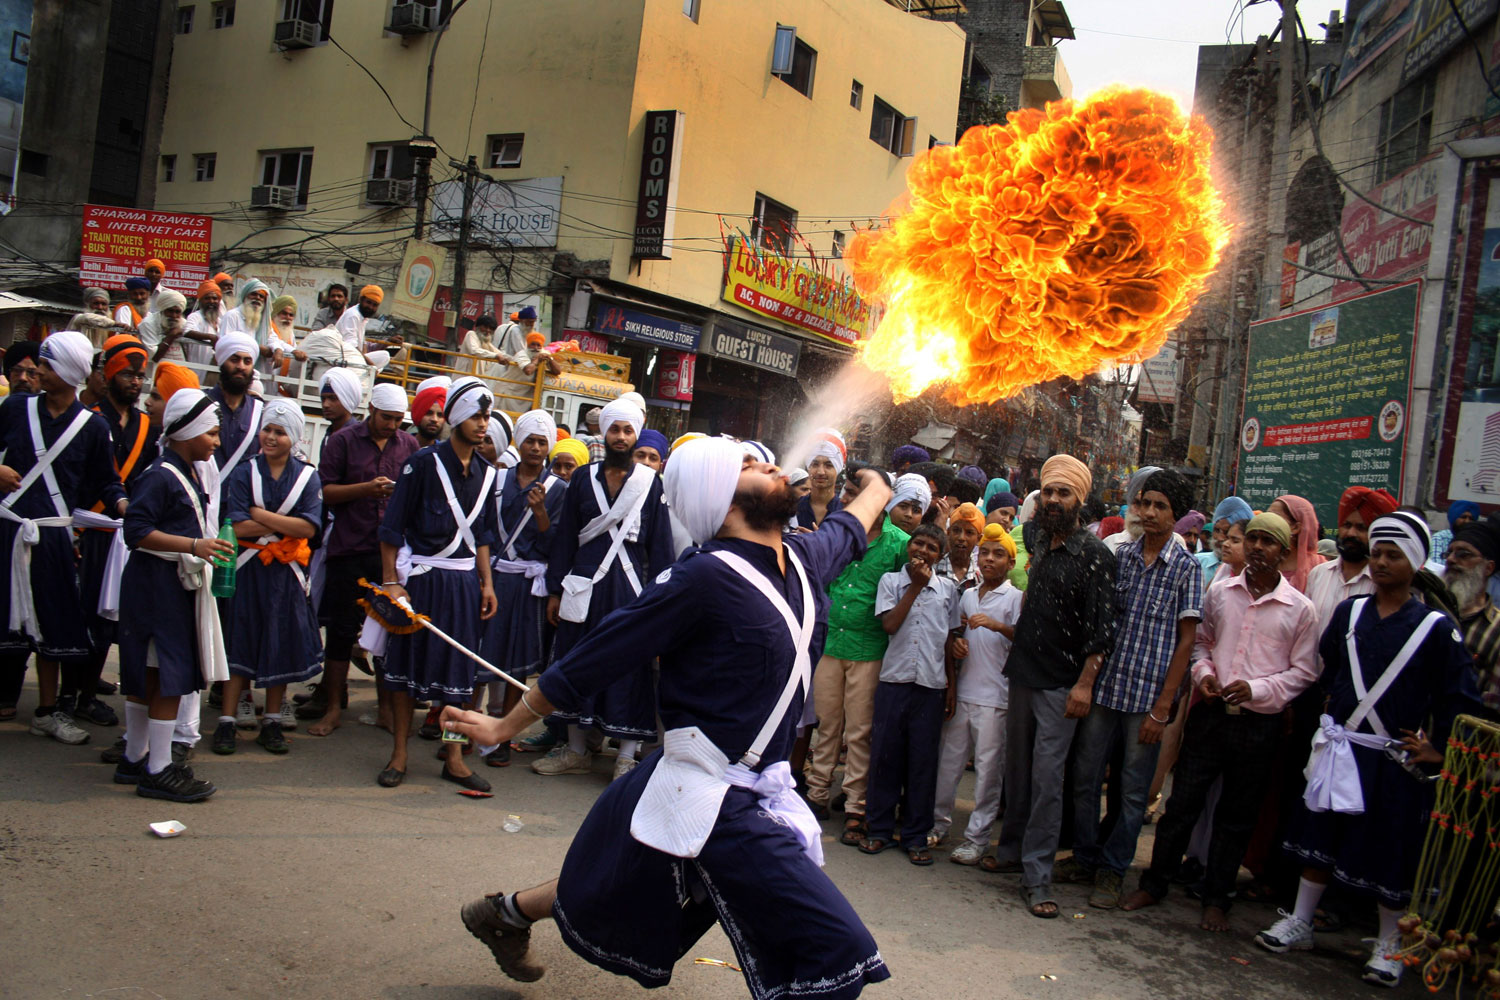 Oct. 8, 2013. A Sikh youth breathes fire during a religious procession on the eve of Guru Ram Das's birthday in Amritsar, India.